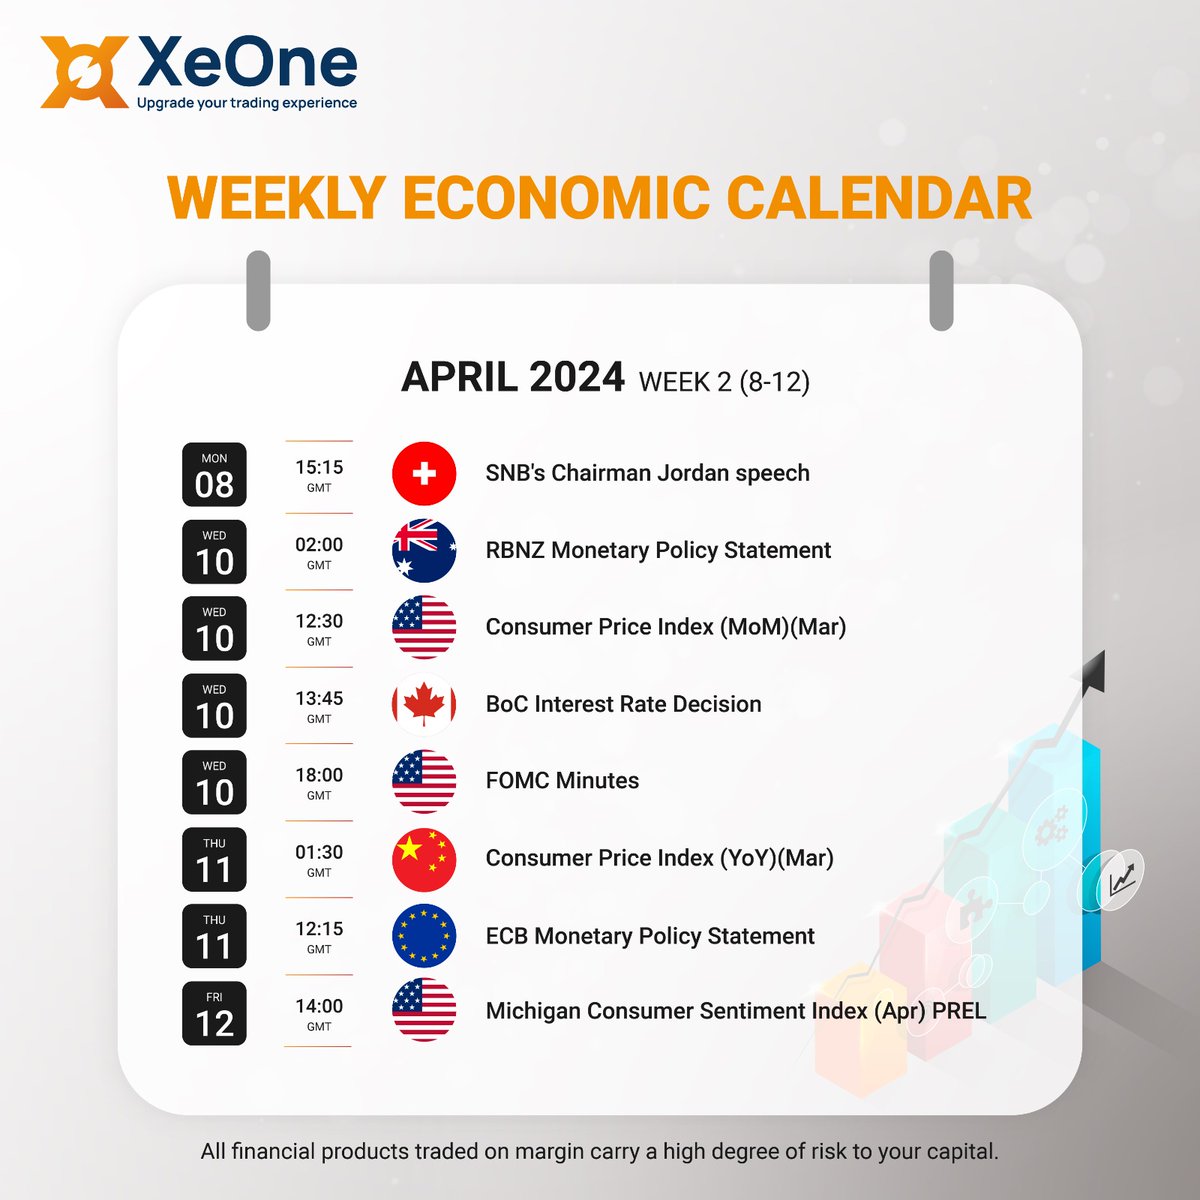 Stay informed and trade confidently with XeOne's Weekly Economic Calendar. Don't miss out on important updates! 

#XeOne #EconomicCalendar #TradeSmart  #NewsUpdate